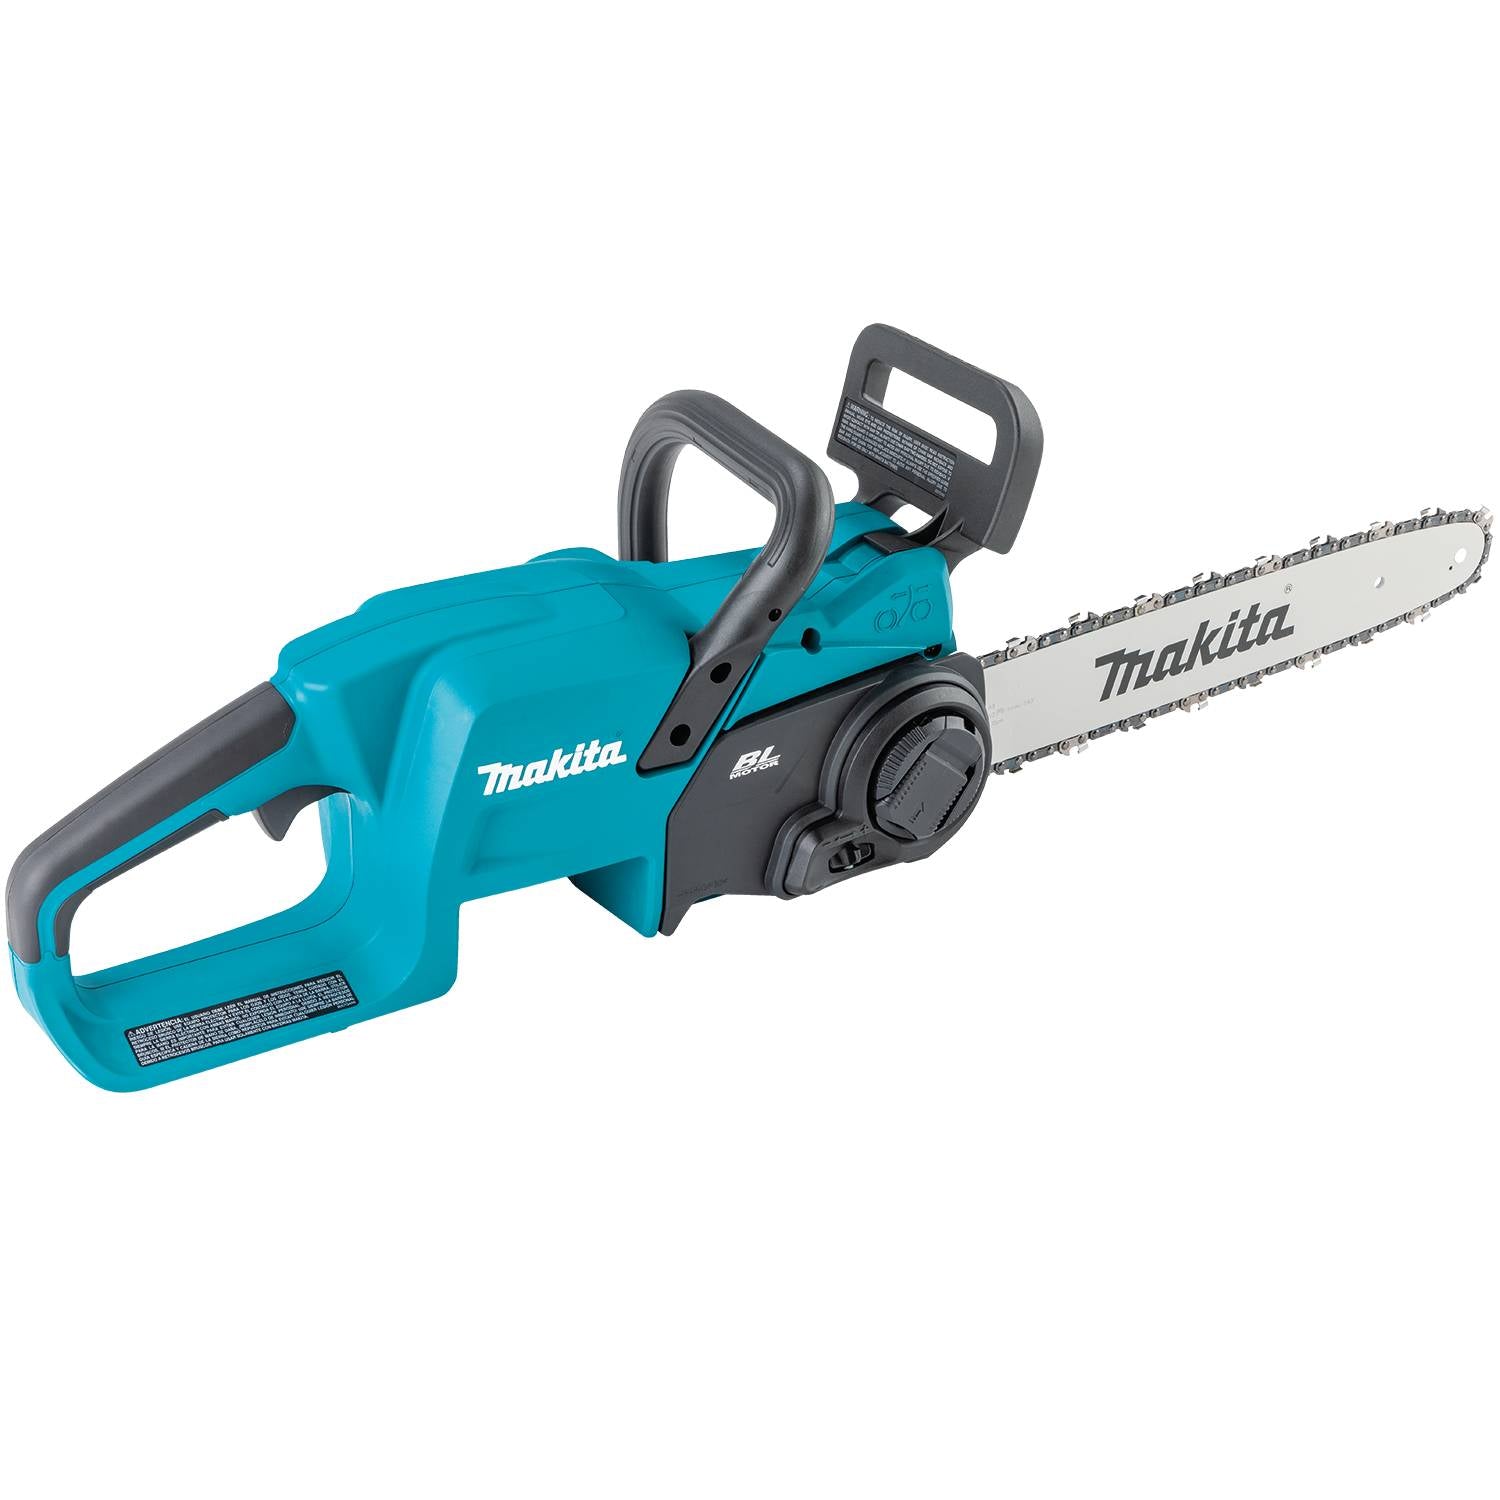 Makita XCU11Z 18V LXT Lithium-Ion Brushless Cordless 14" Chain Saw, Tool Only